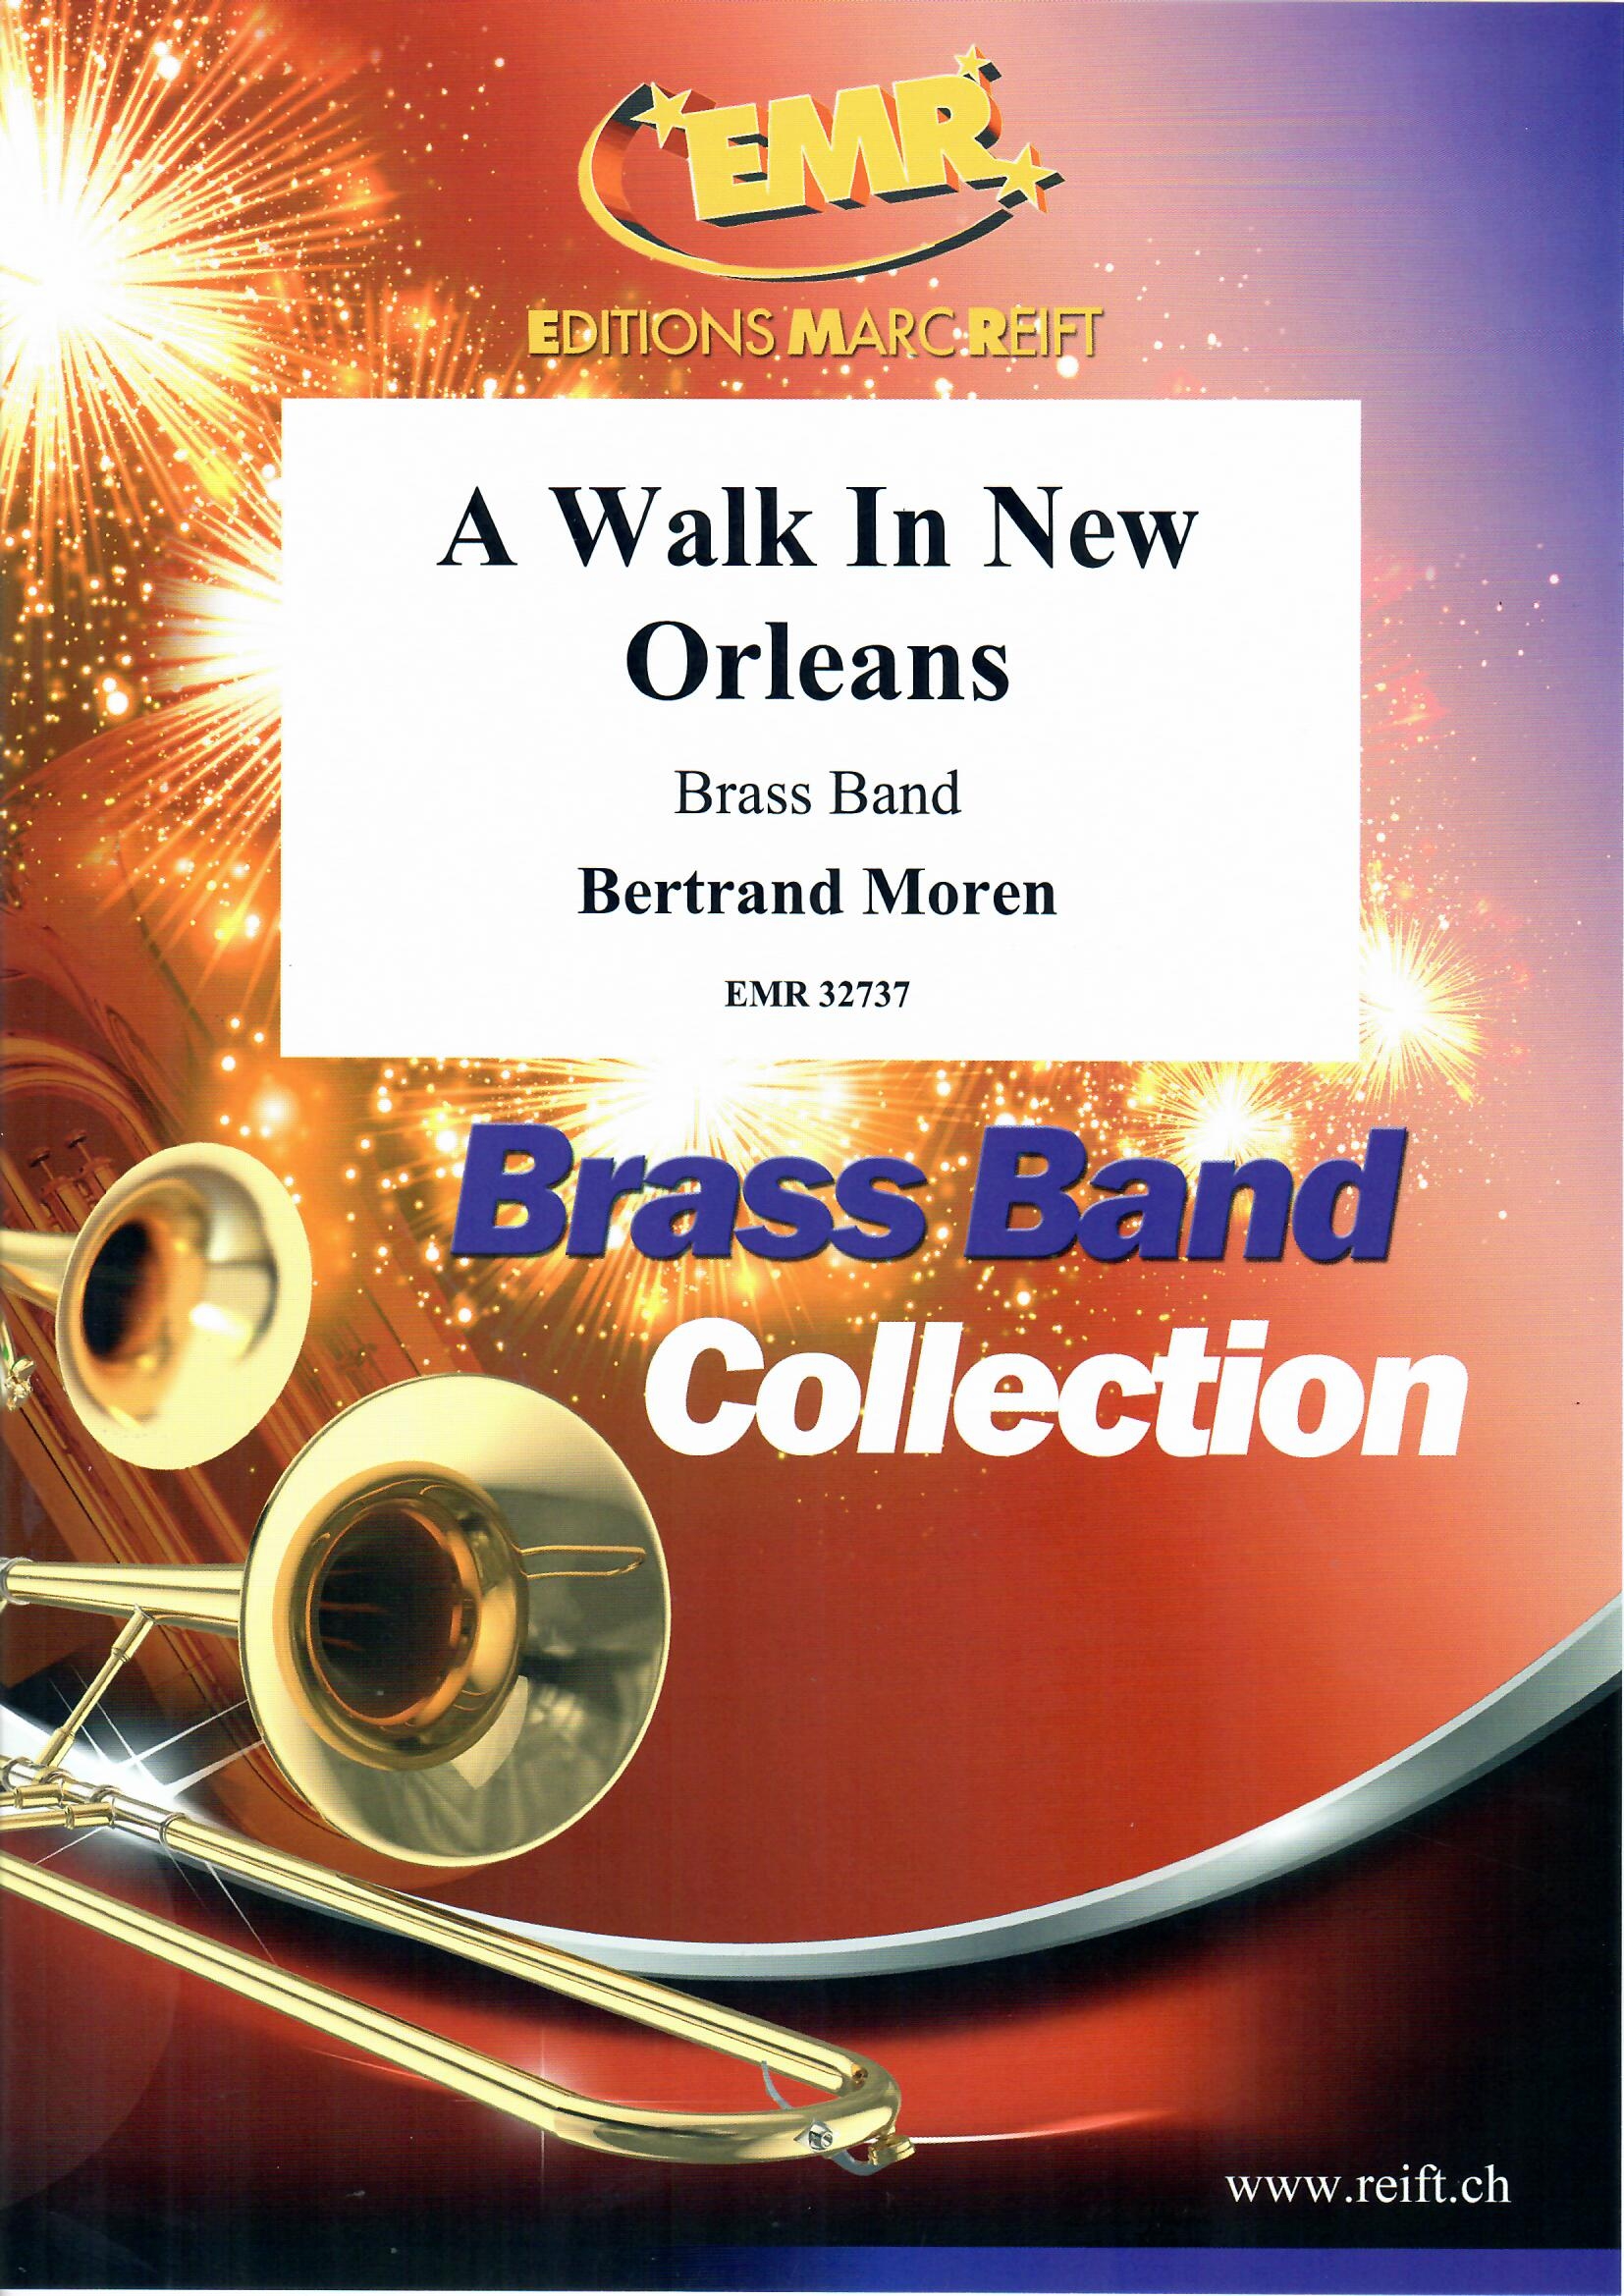 A WALK IN NEW ORLEANS - Parts & Score, LIGHT CONCERT MUSIC